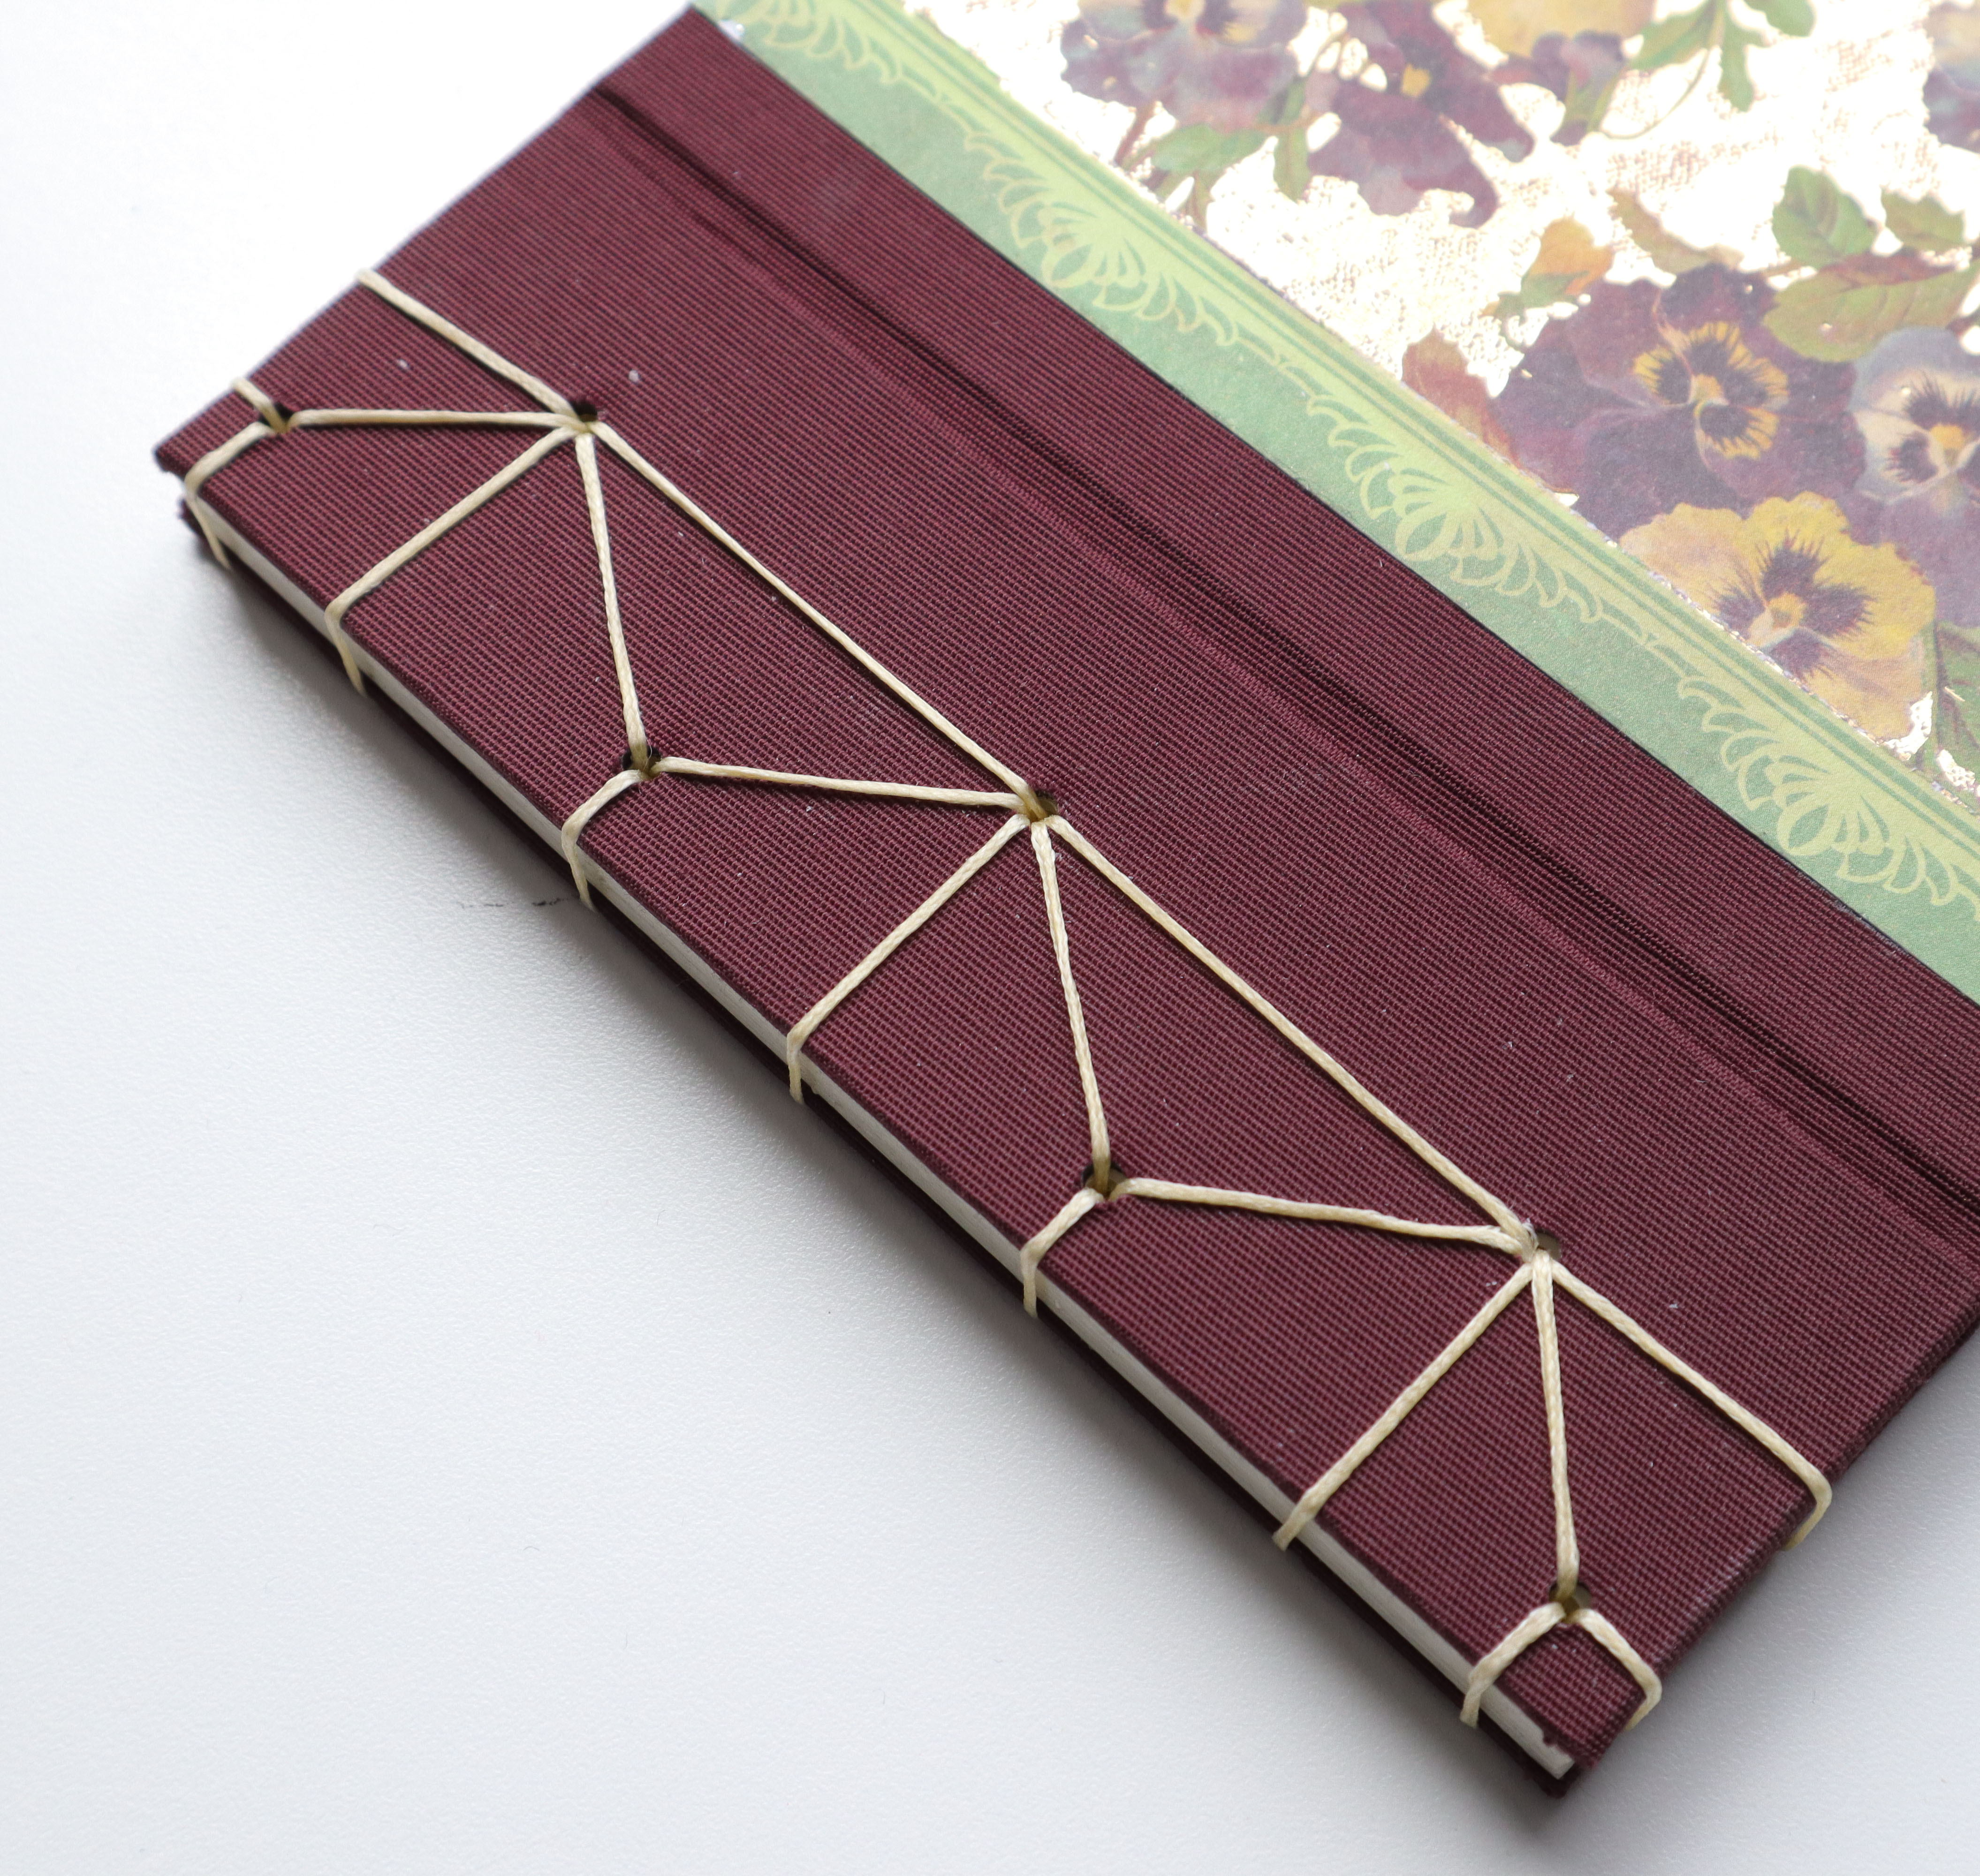 a book with burgundy book cloth and a floral cover sewn by misty mcintosh featuring the hemp leaf japanese stab binding technique